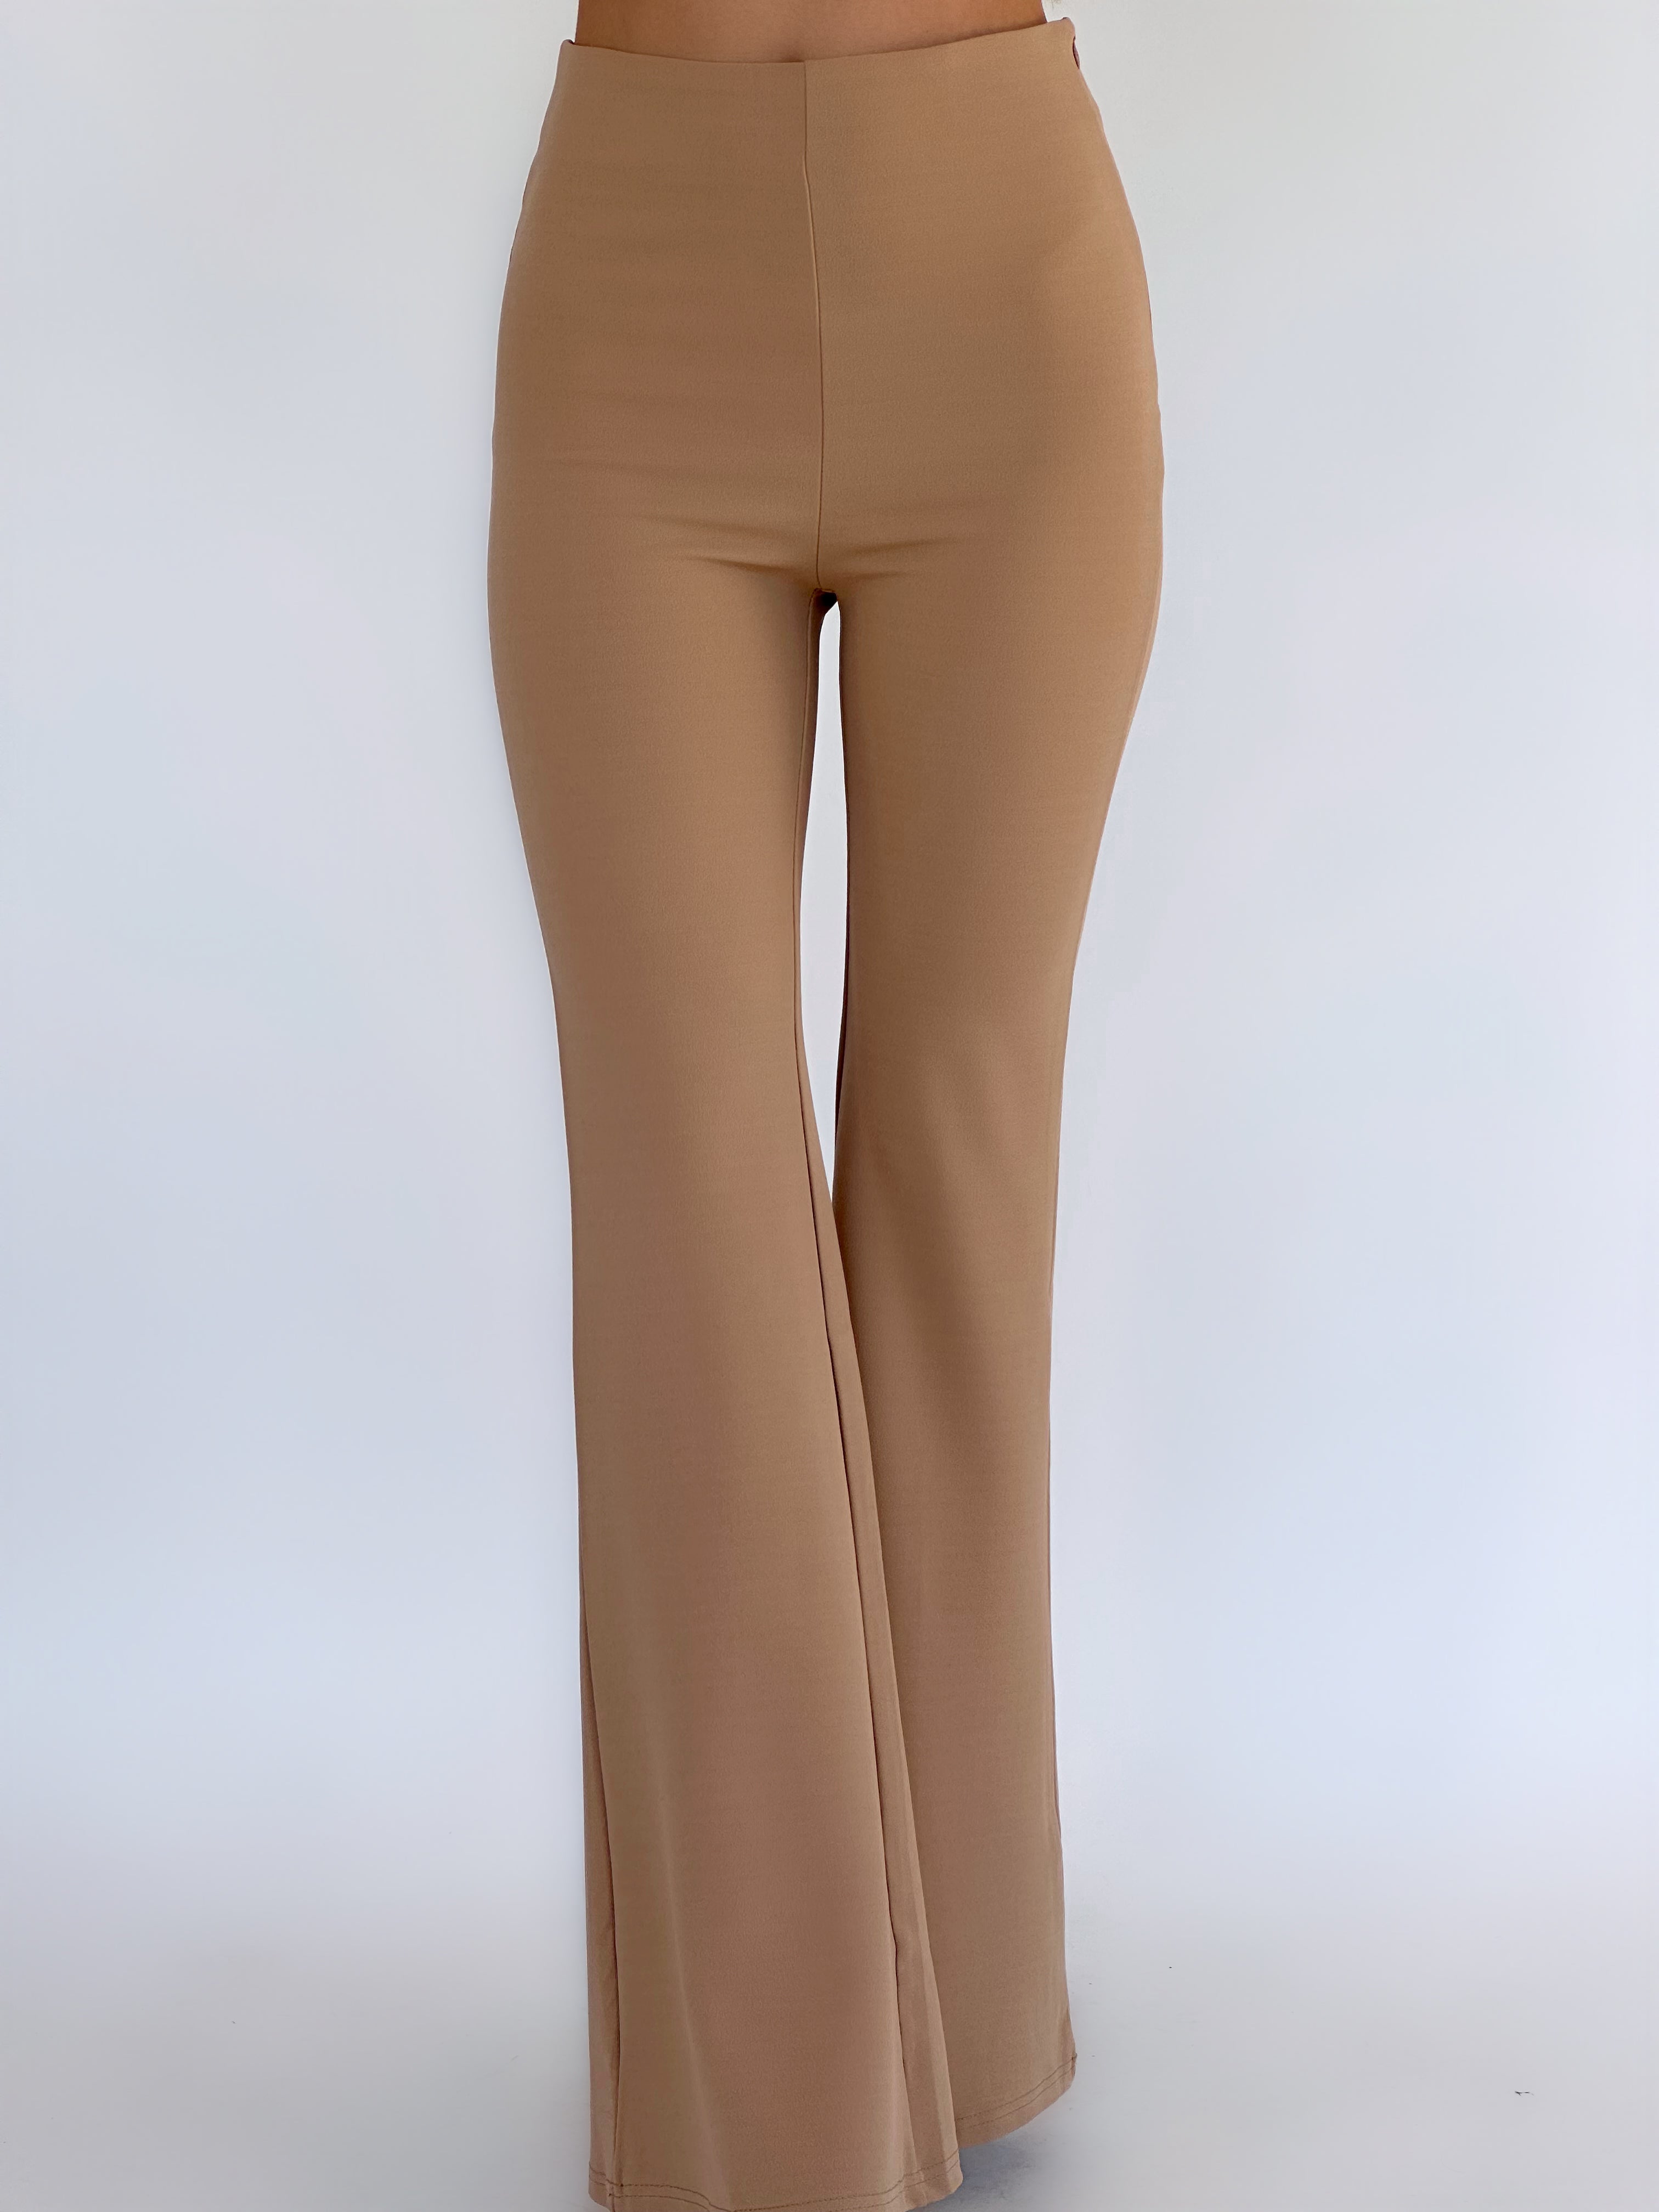 FLARED TROUSER IN CAMEL